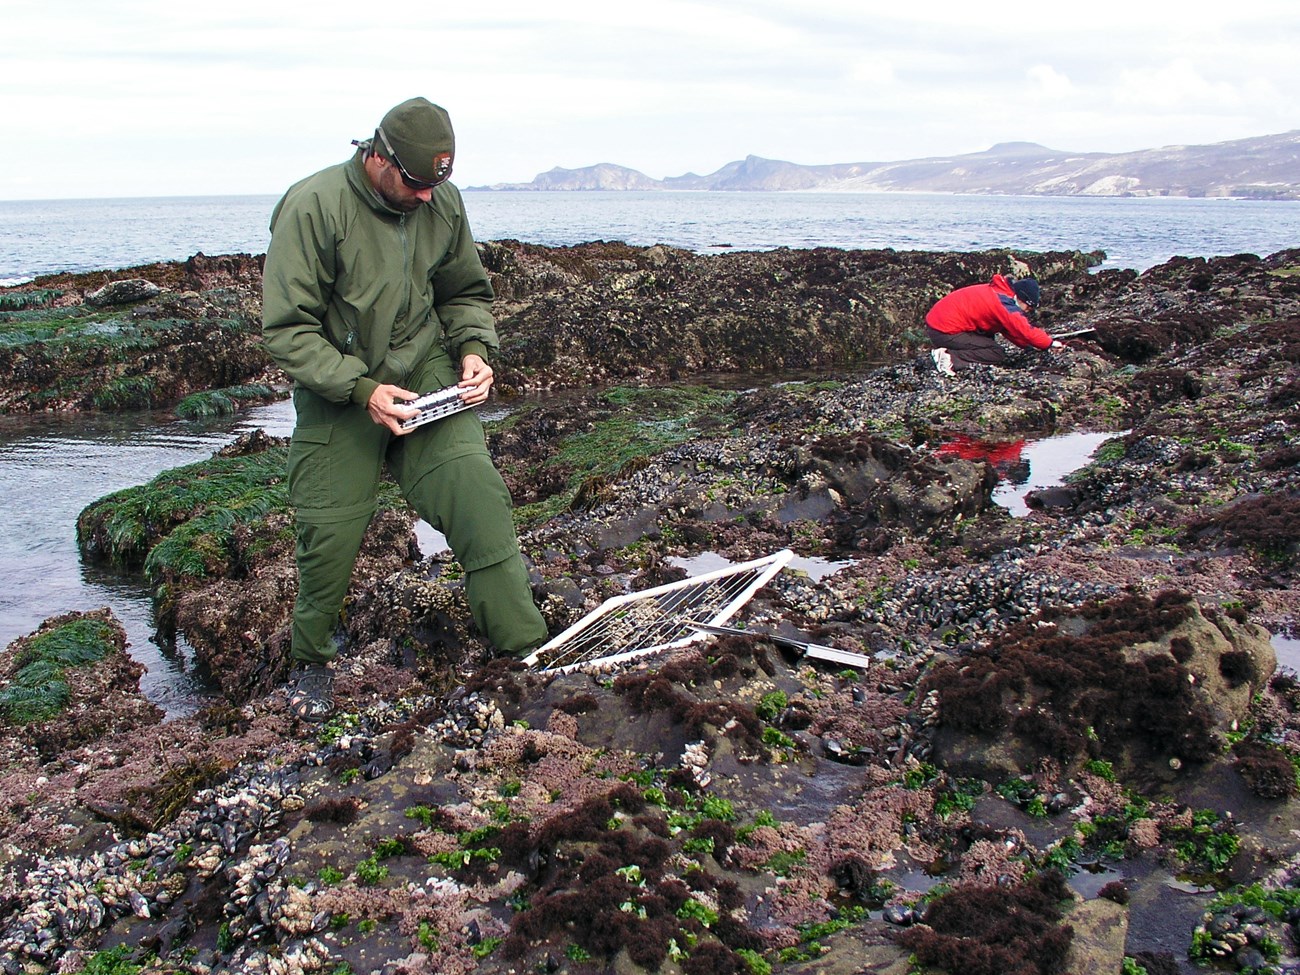 Steve and a coworker collect data at nearby rocky intertidal monitoring plots on a calm day.